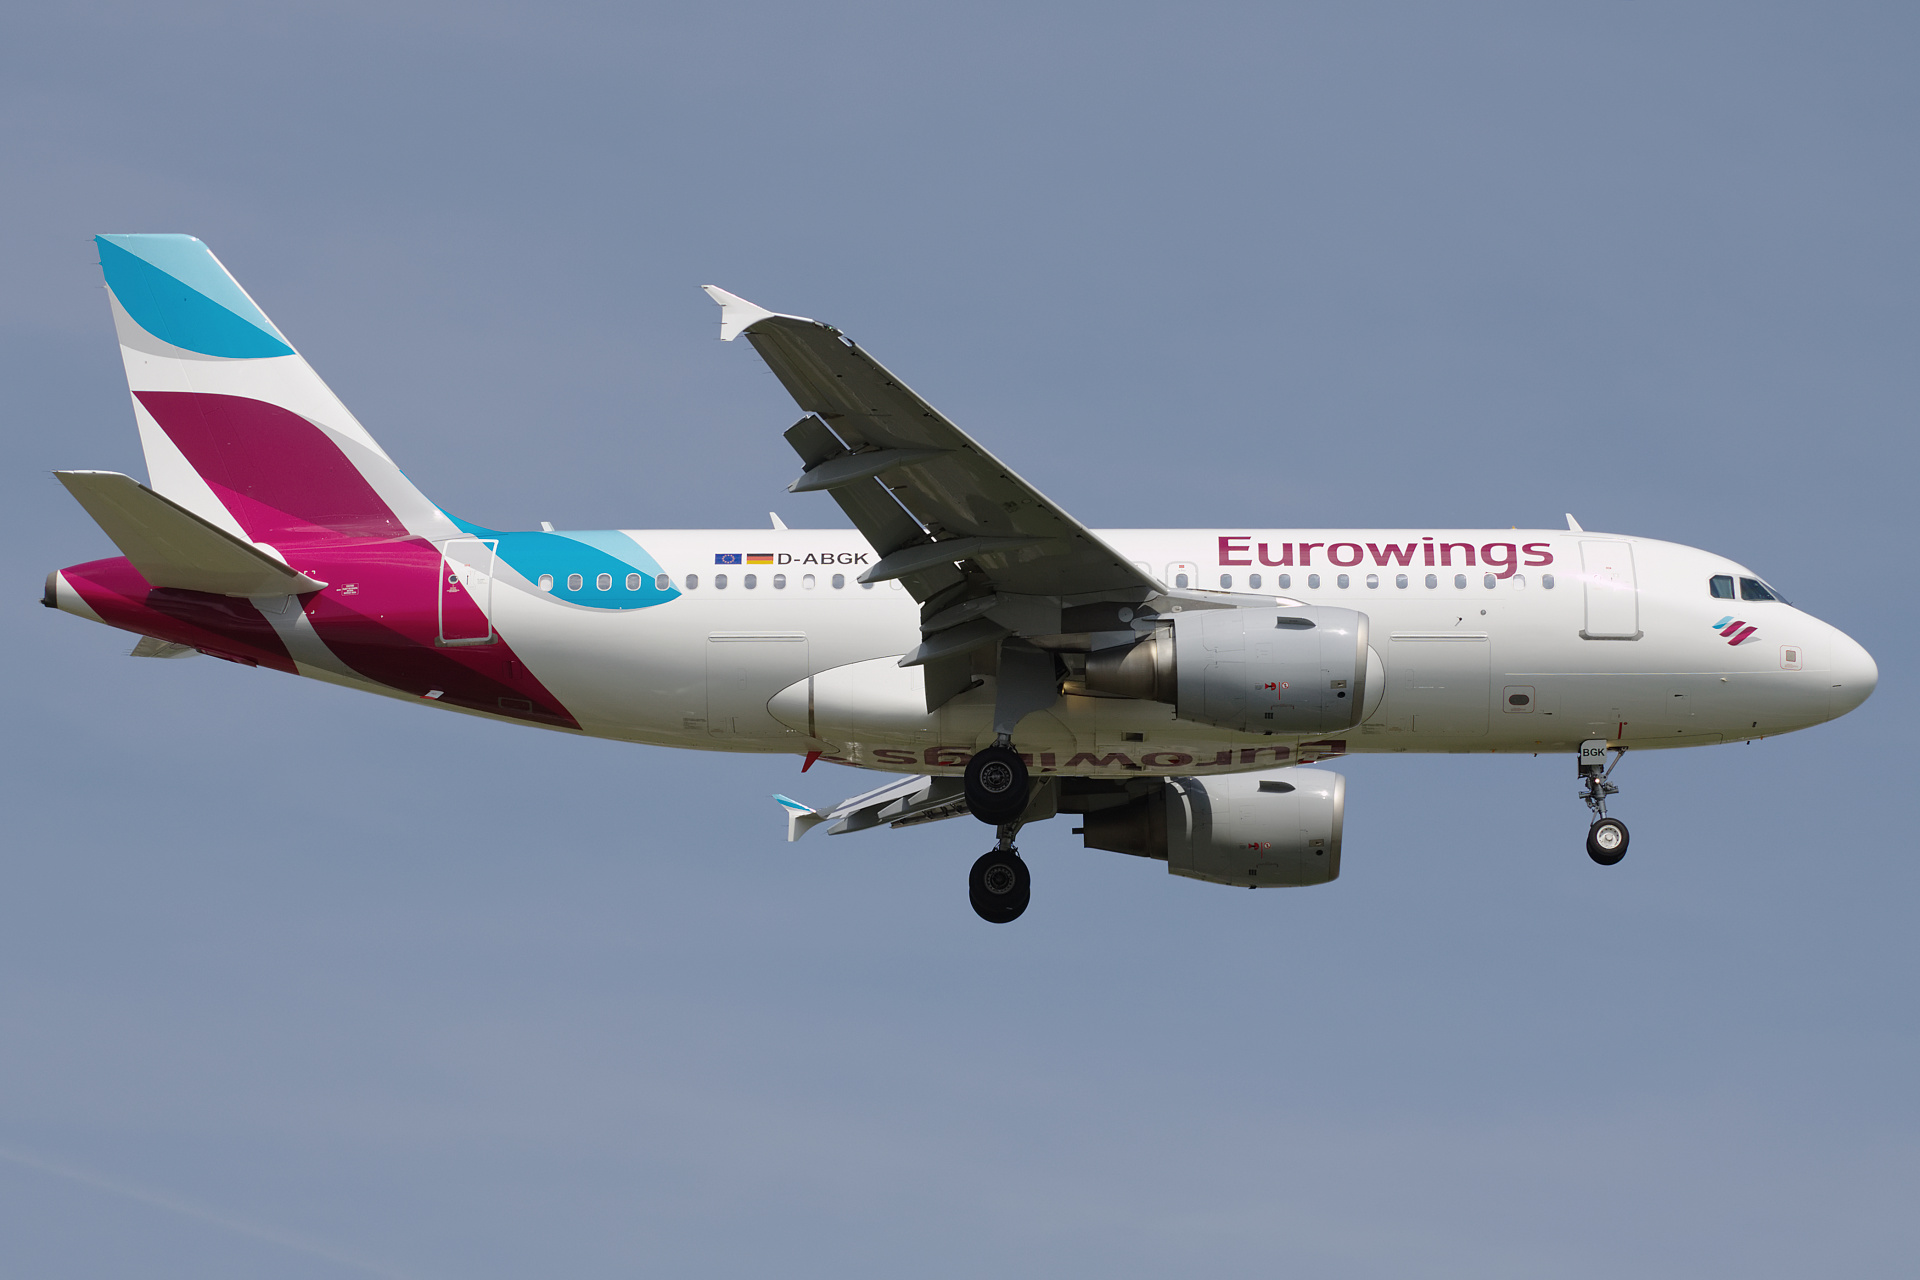 D-ABGK, Eurowings (Aircraft » EPWA Spotting » Airbus A319-100)